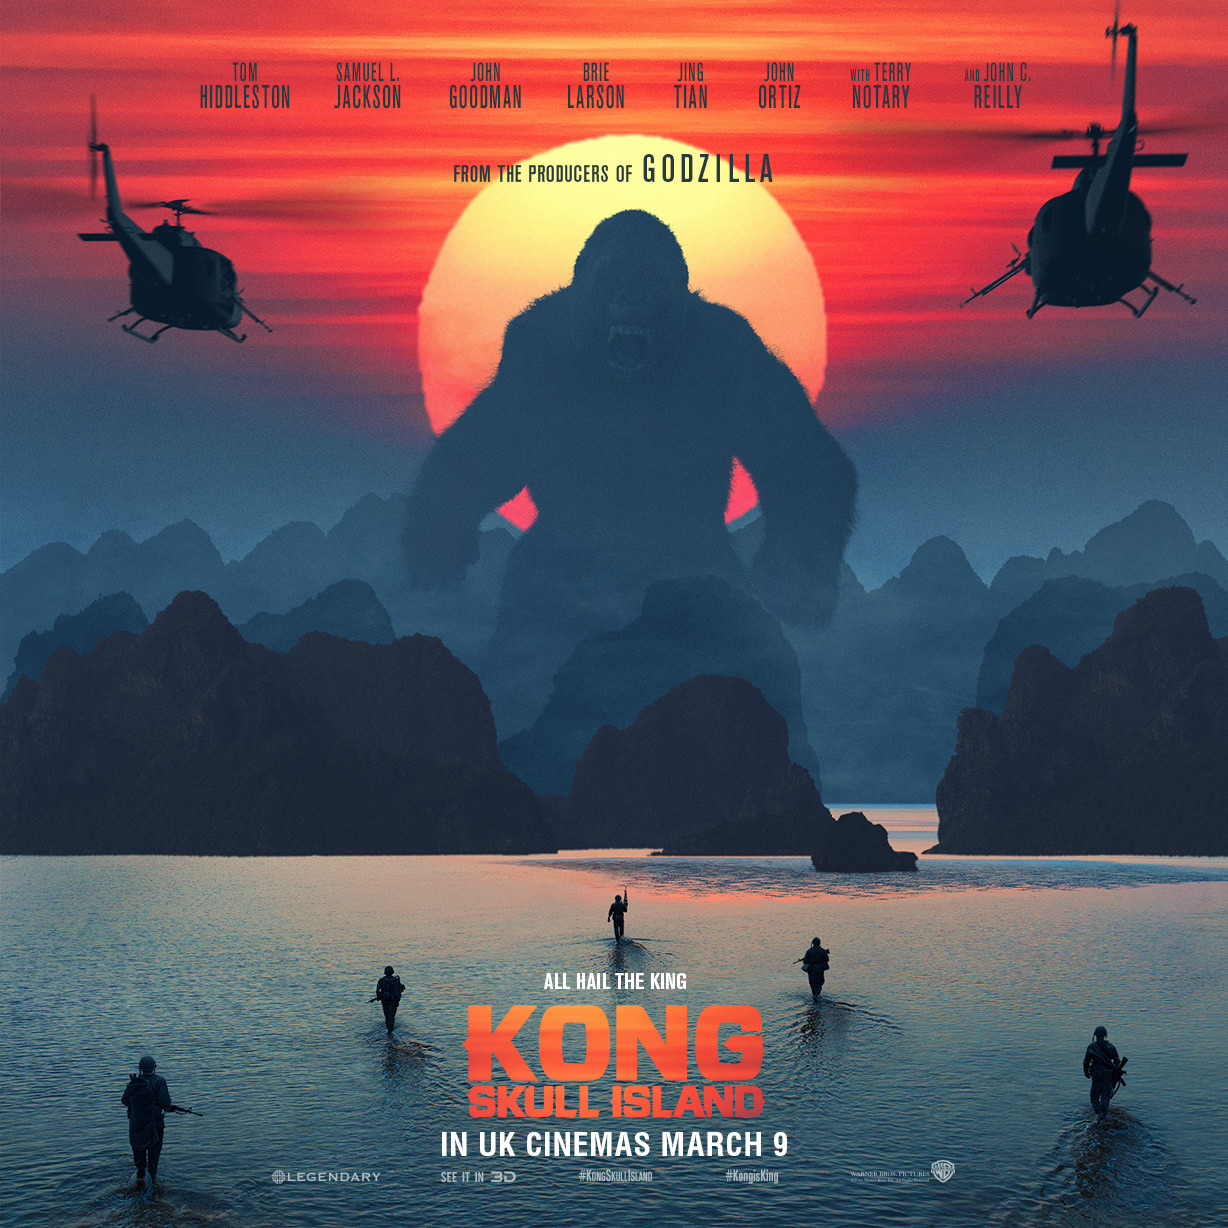 Be prepared! This Thursday, the King of the big screen returns. Book your #KongSkullIsland tickets now: http://po.st/KongTickets